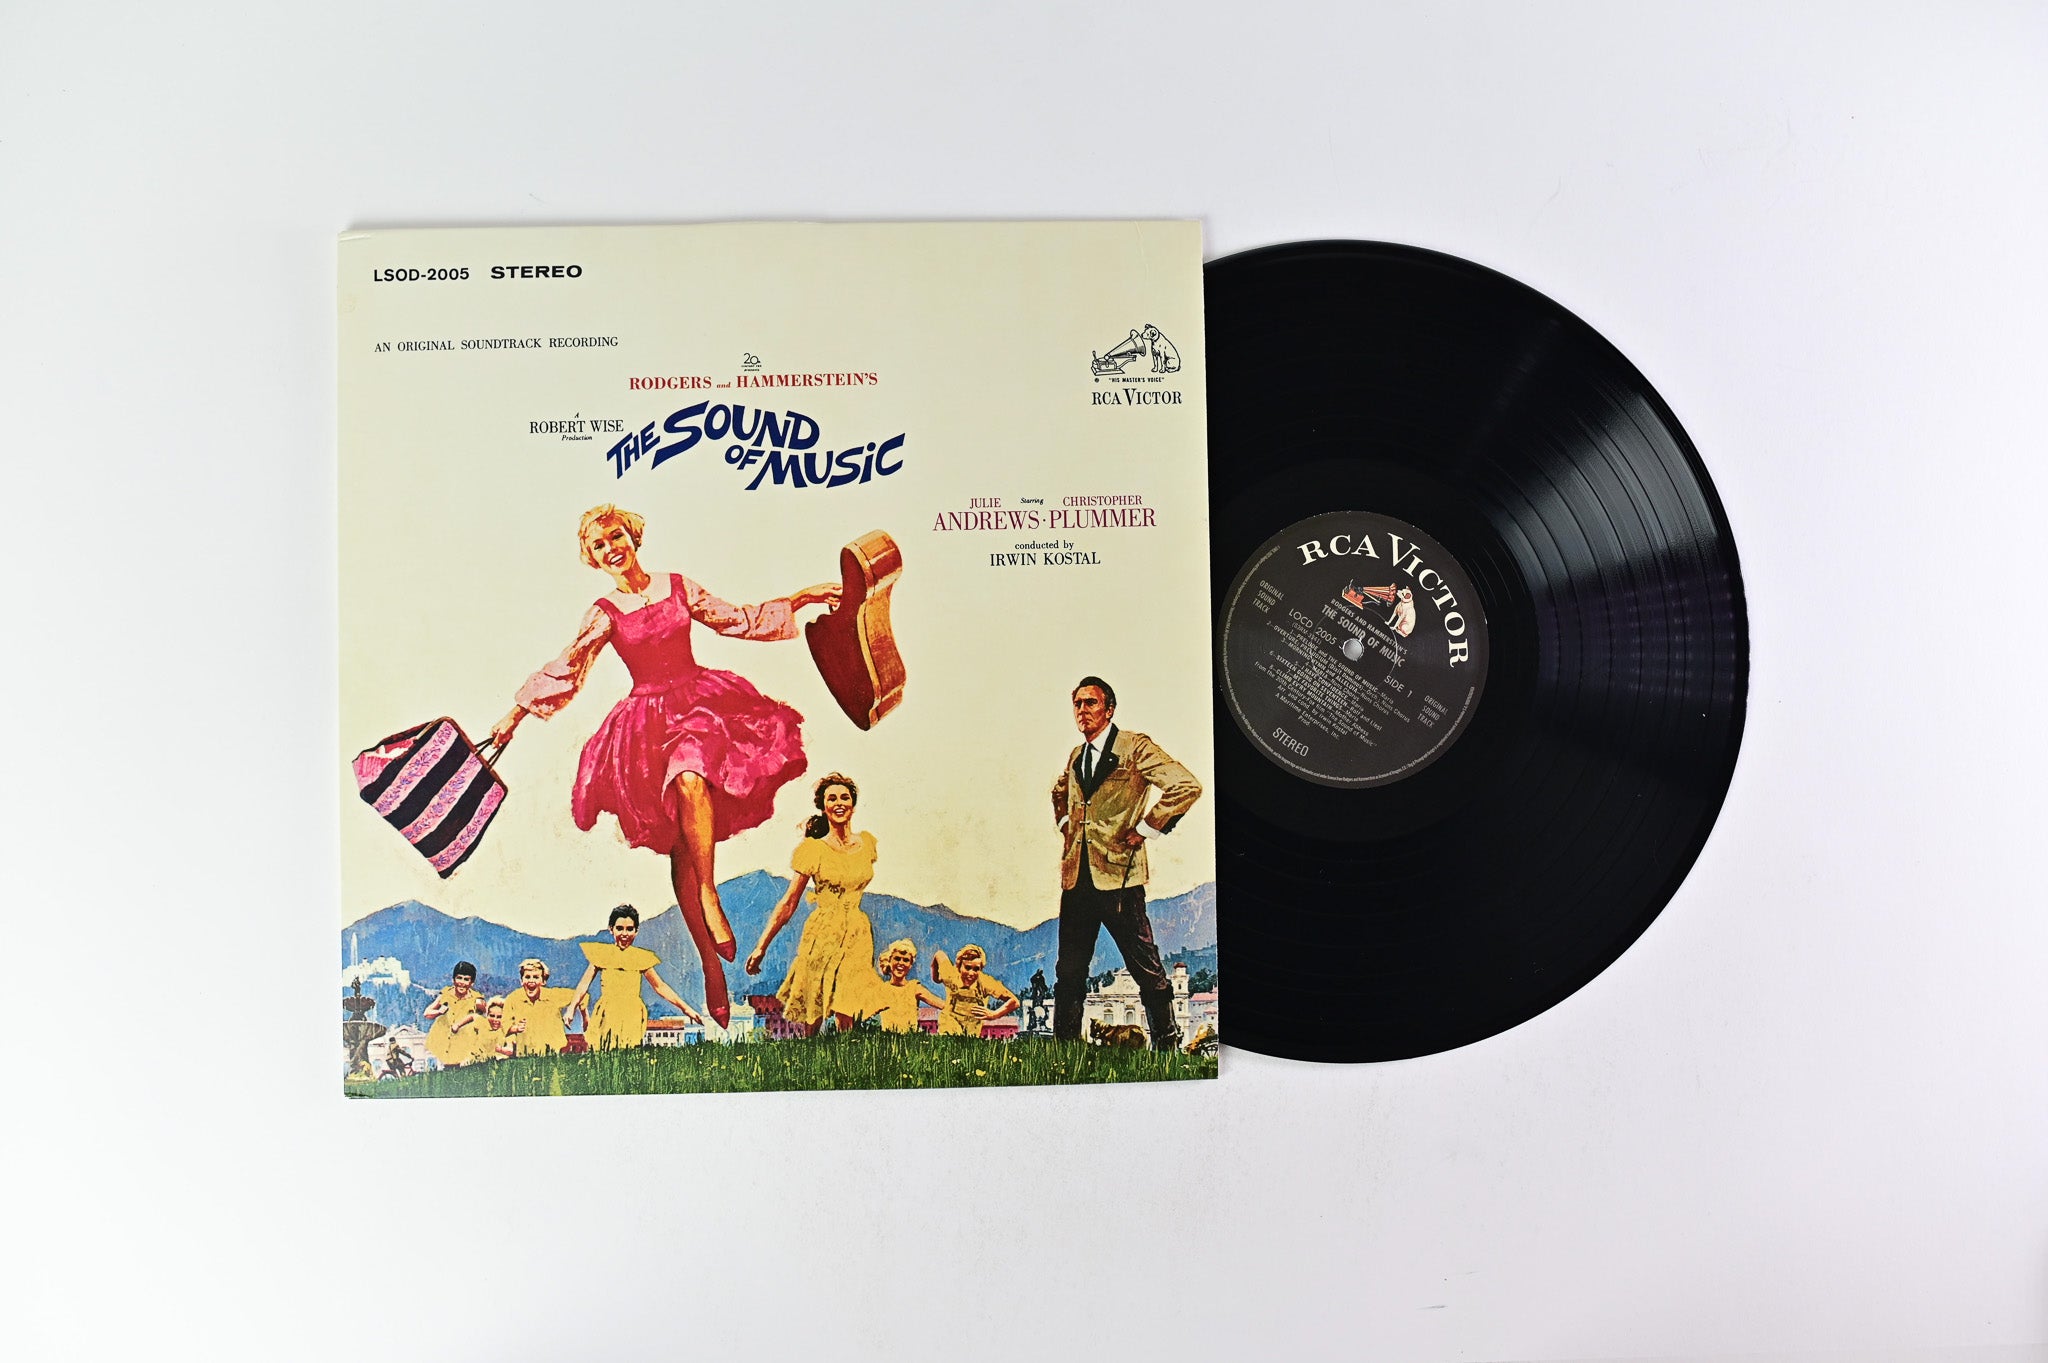 Rodgers & Hammerstein - The Sound Of Music (An Original Soundtrack Recording) Reissue on RCA Victor/Analog Spark